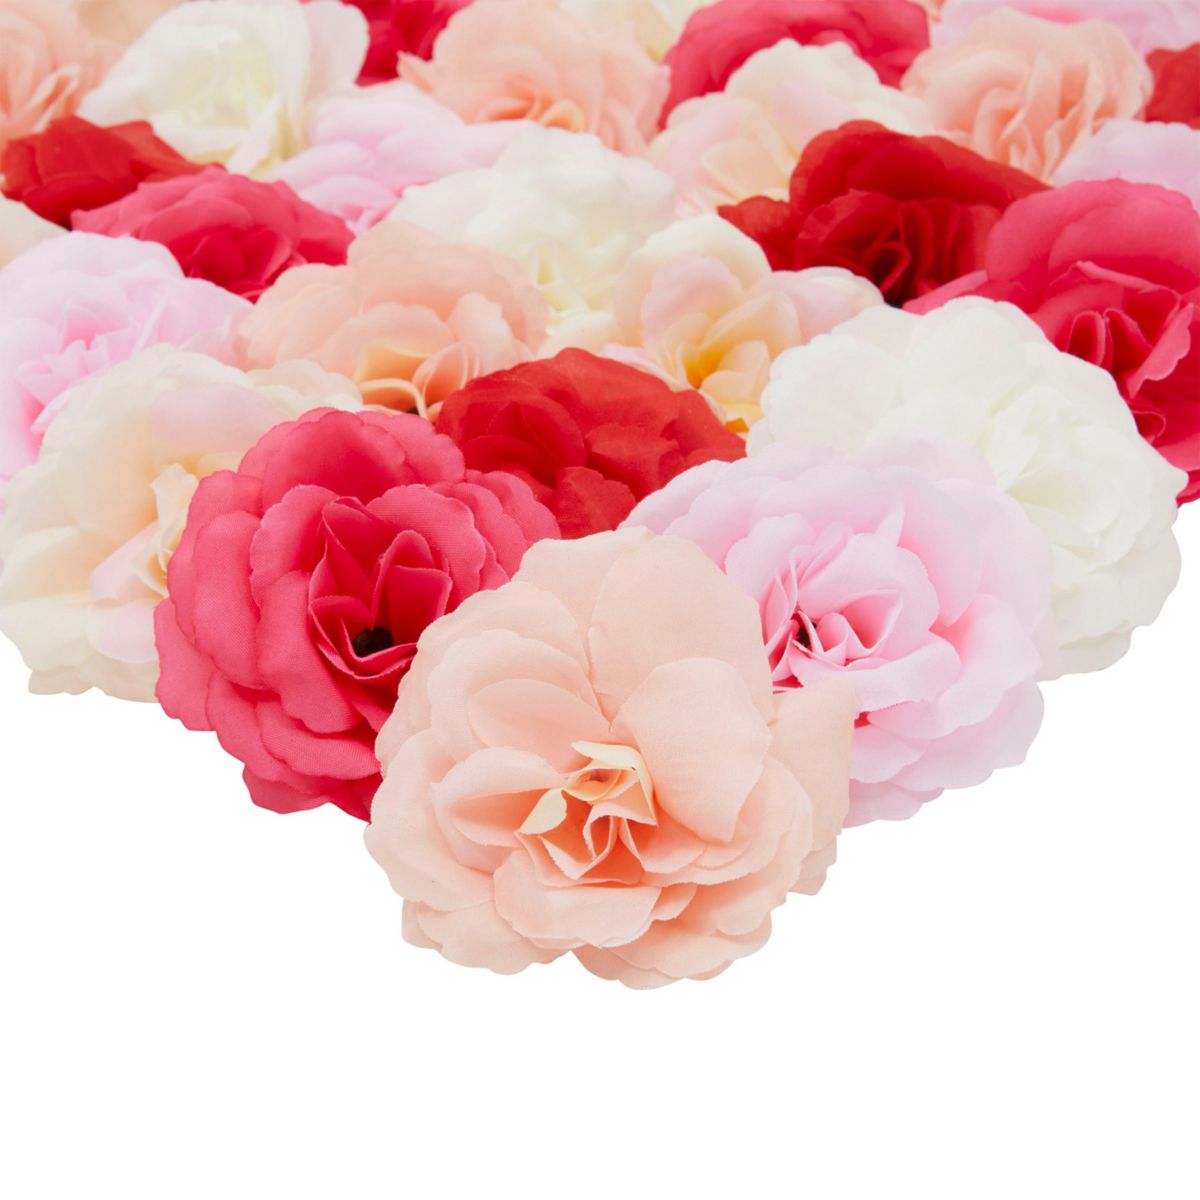 60 Pack Small Artificial Flower Heads for DIY Crafts, Loose Fake Carnations for Wedding Decorations, Baby Showers, 6 Colors (2.7 In) Juvale